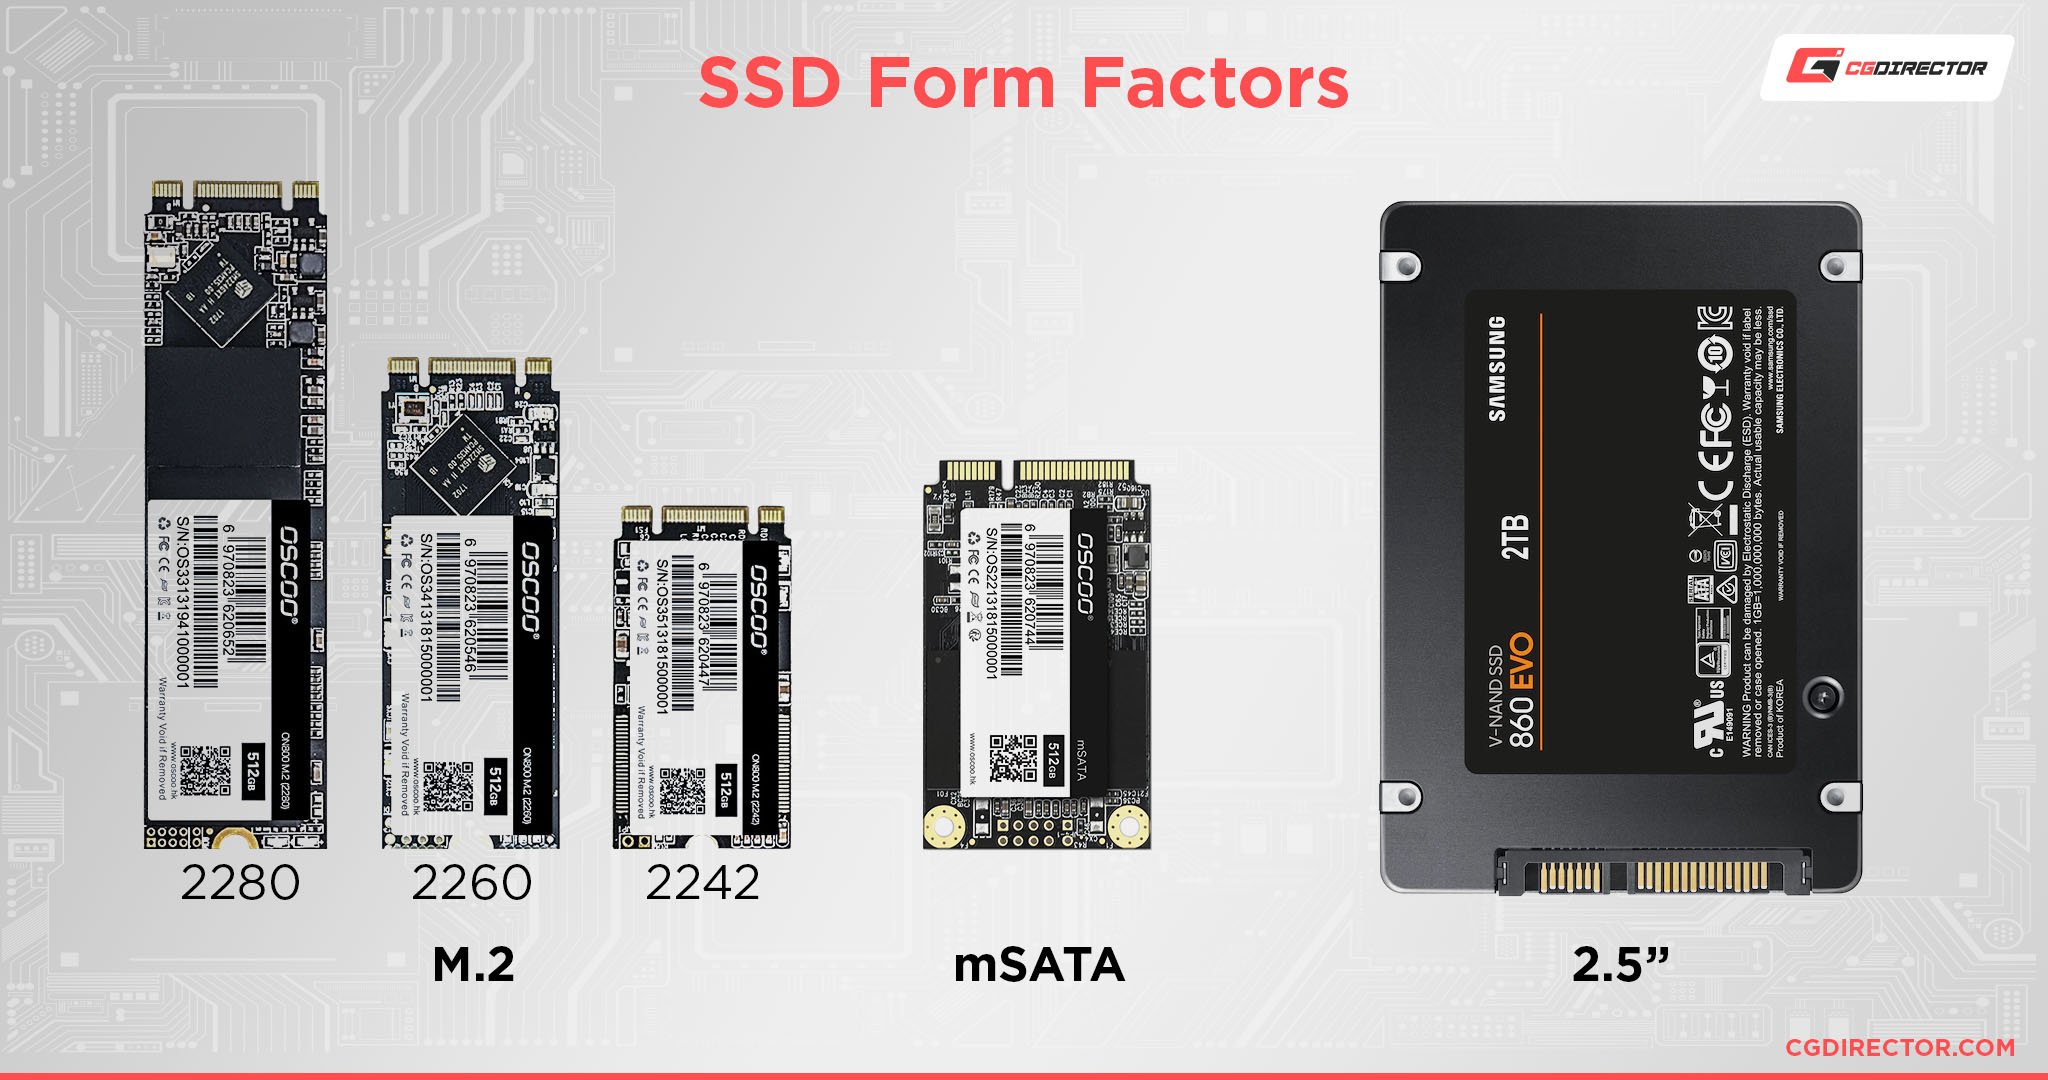 Nvme Sata Ssd Explained Whats The Differences 9556